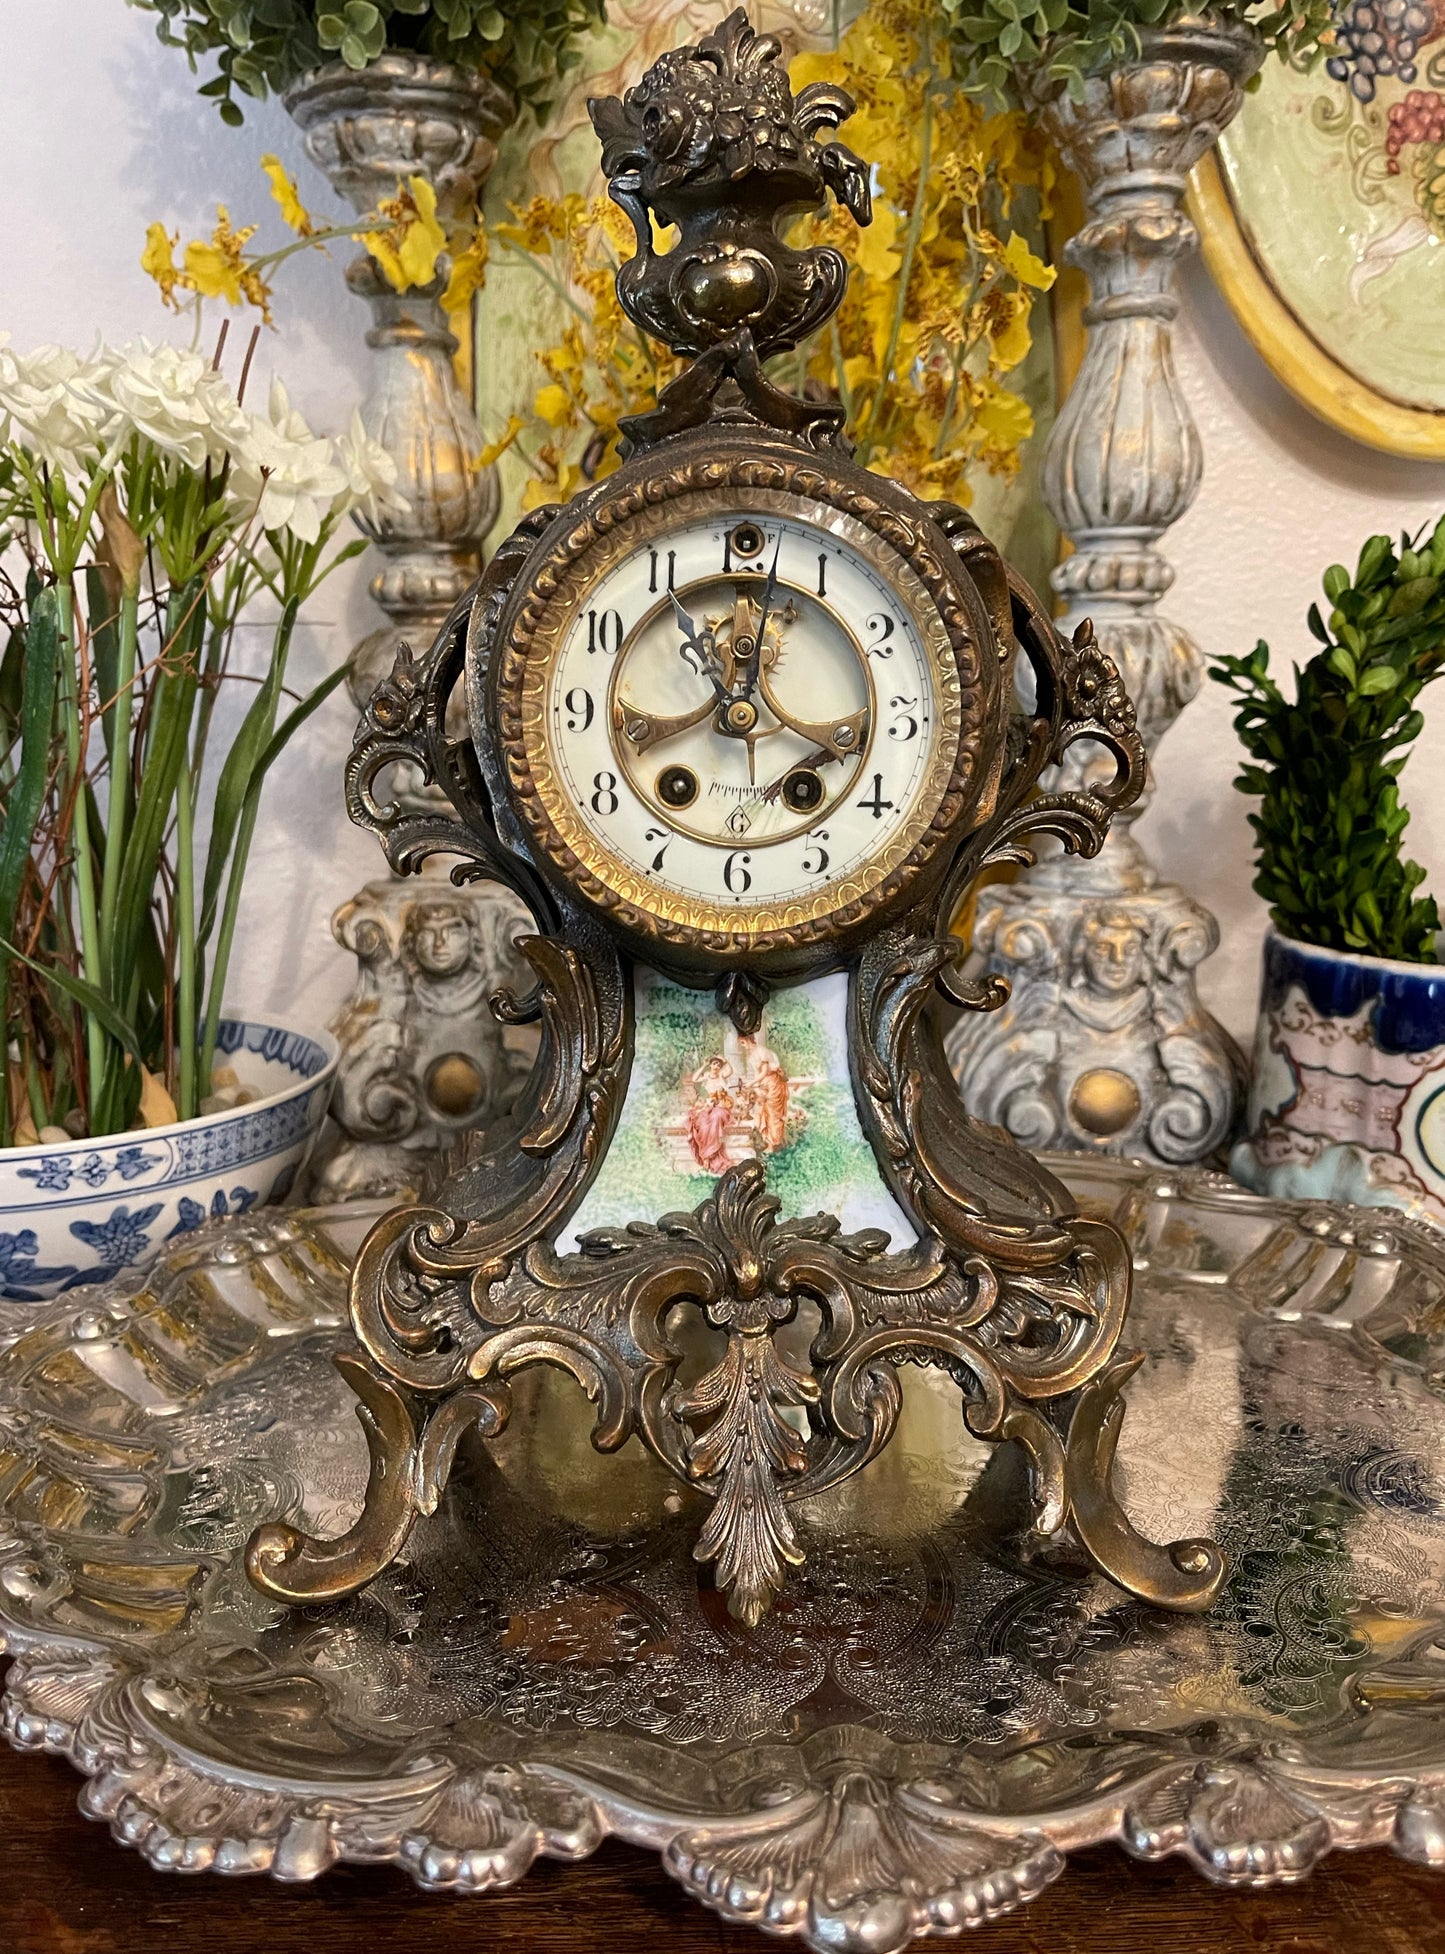 Antique French Ormolu Bronze Mantel Clock with Hand Painted Porcelain Adornment